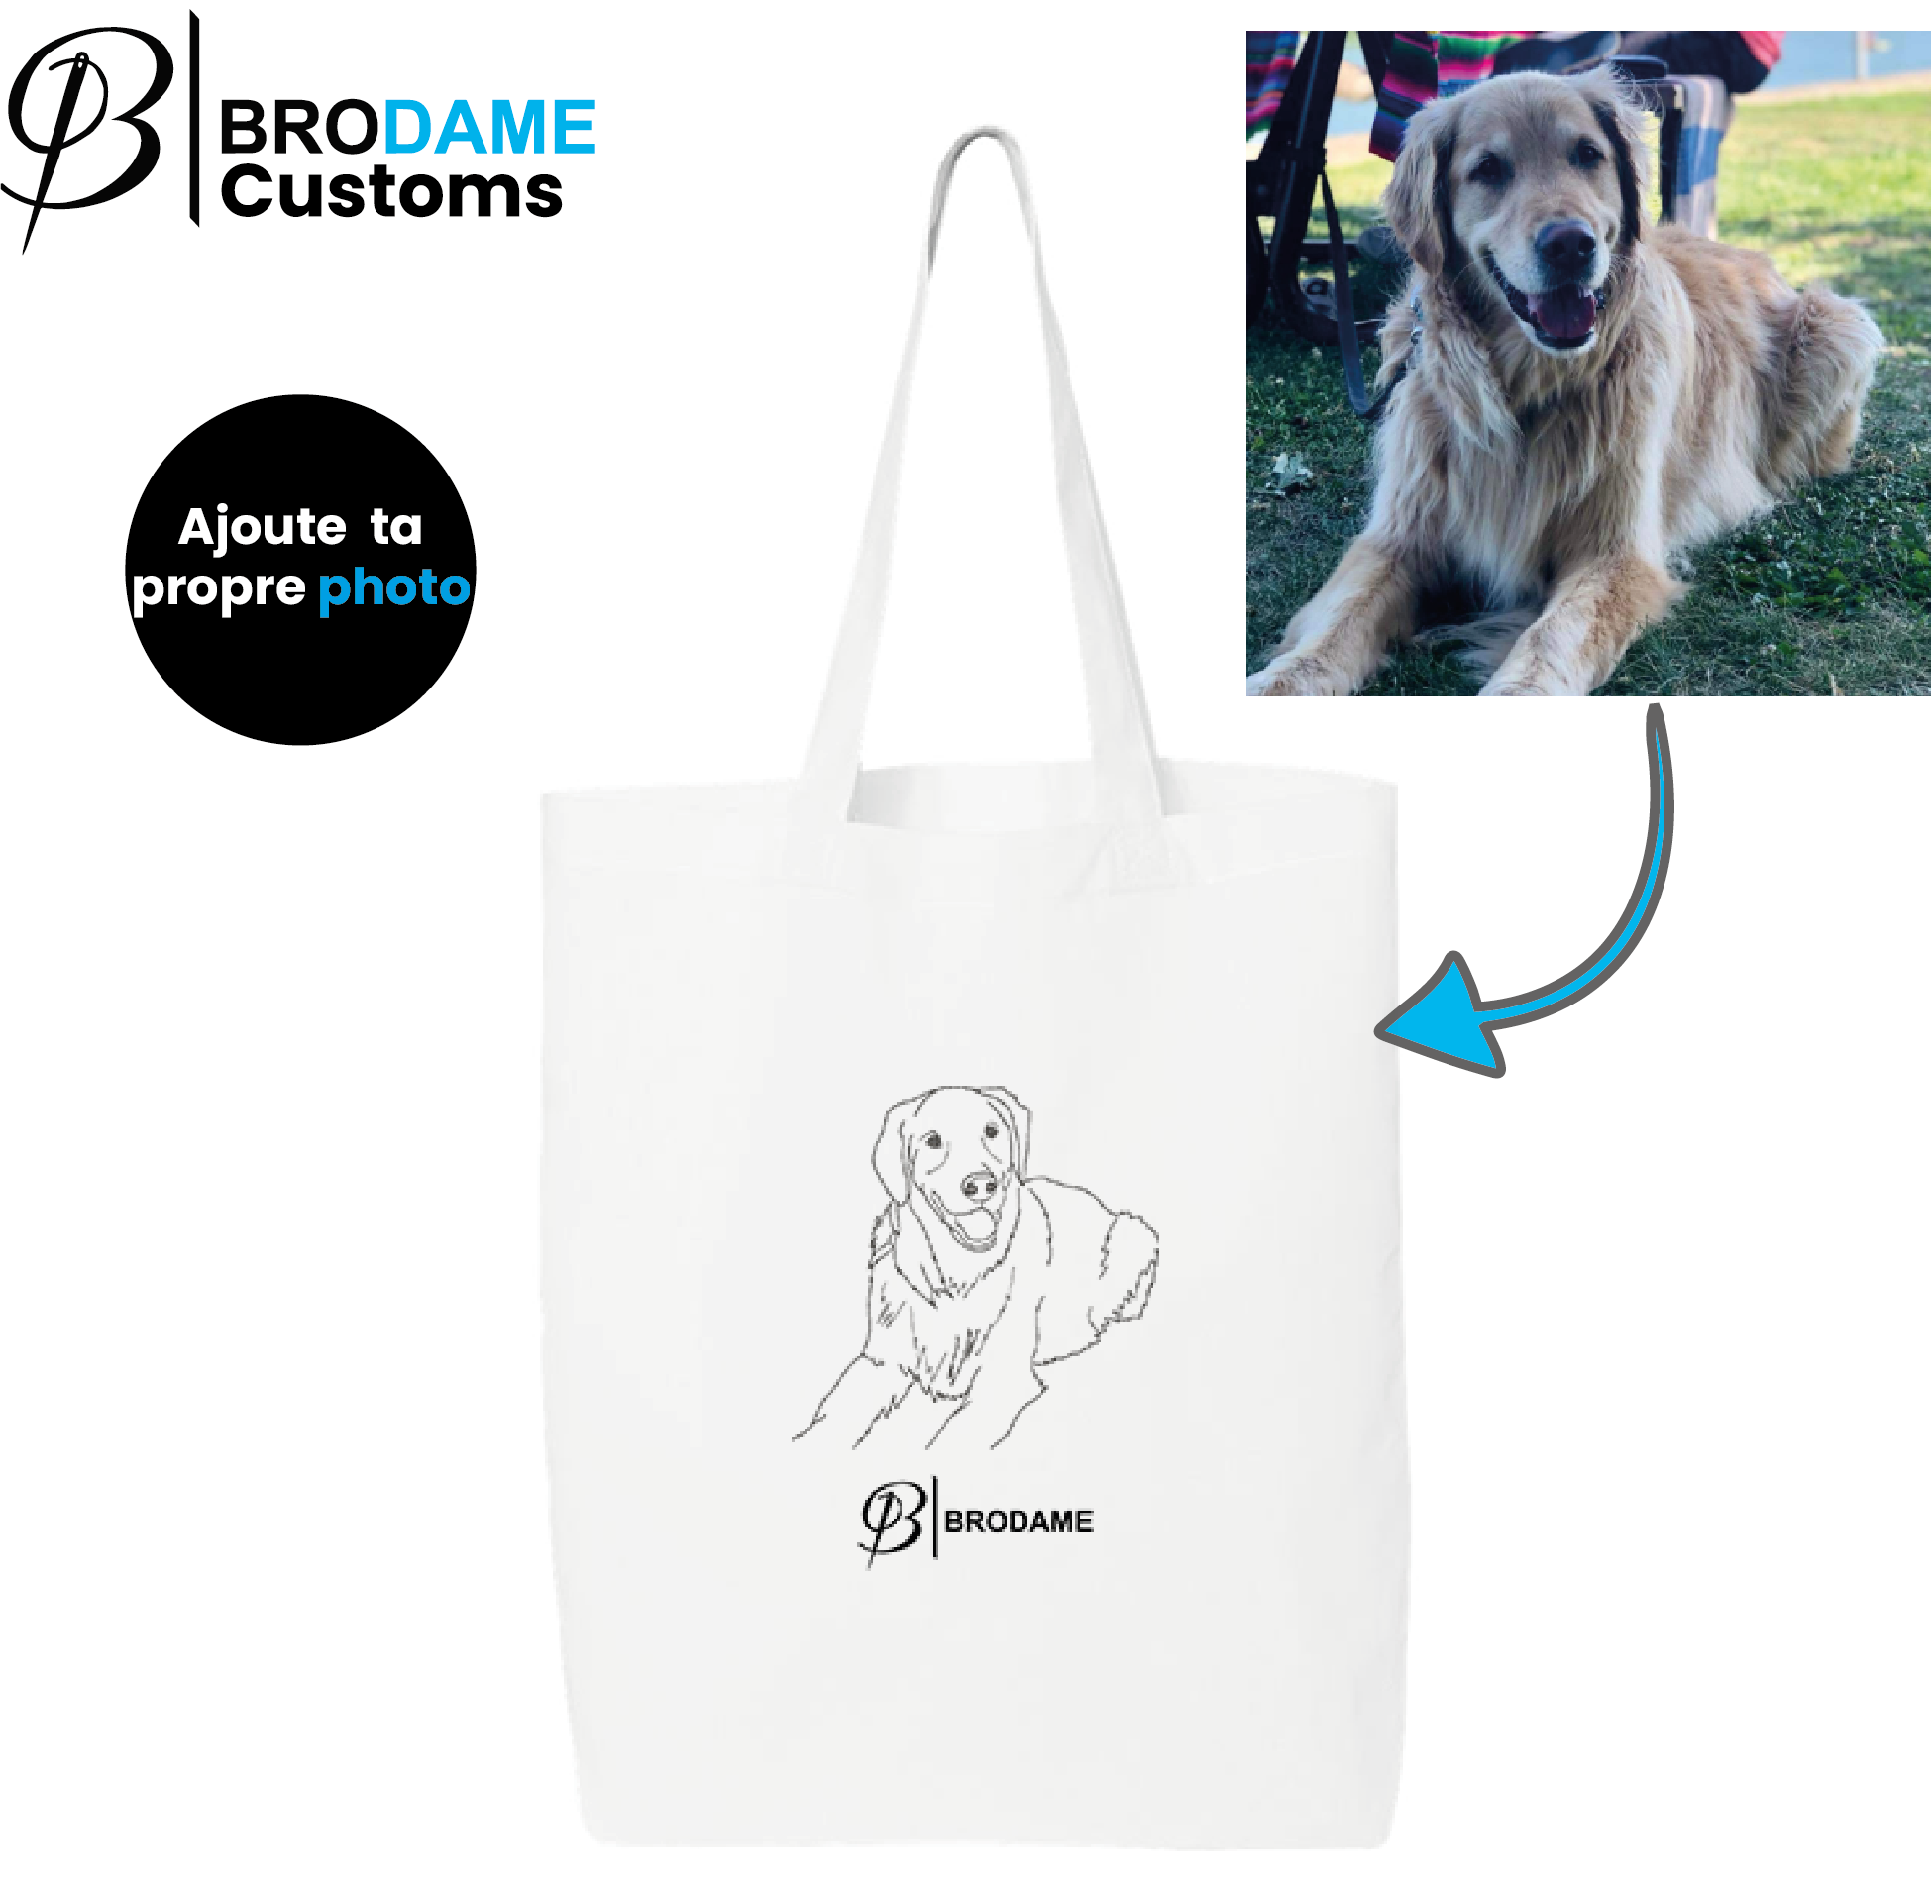 Customized silhouette tote bag